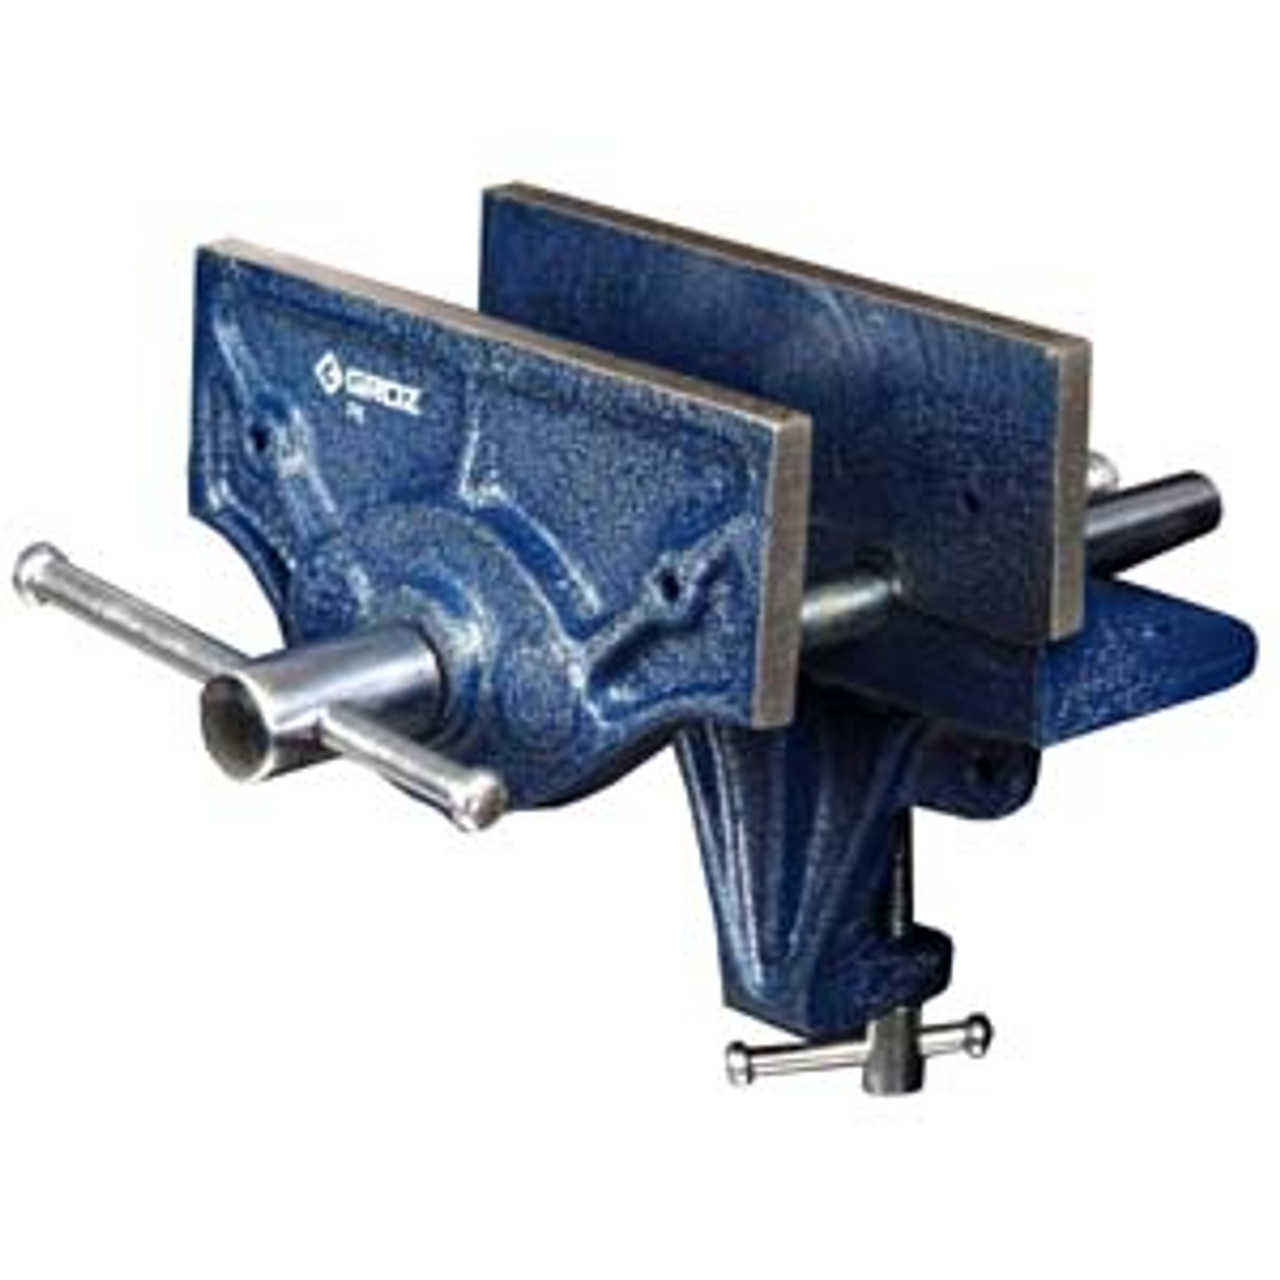 Buy Vise 6in. Woodworking Clamp Type at Busy Bee Tools